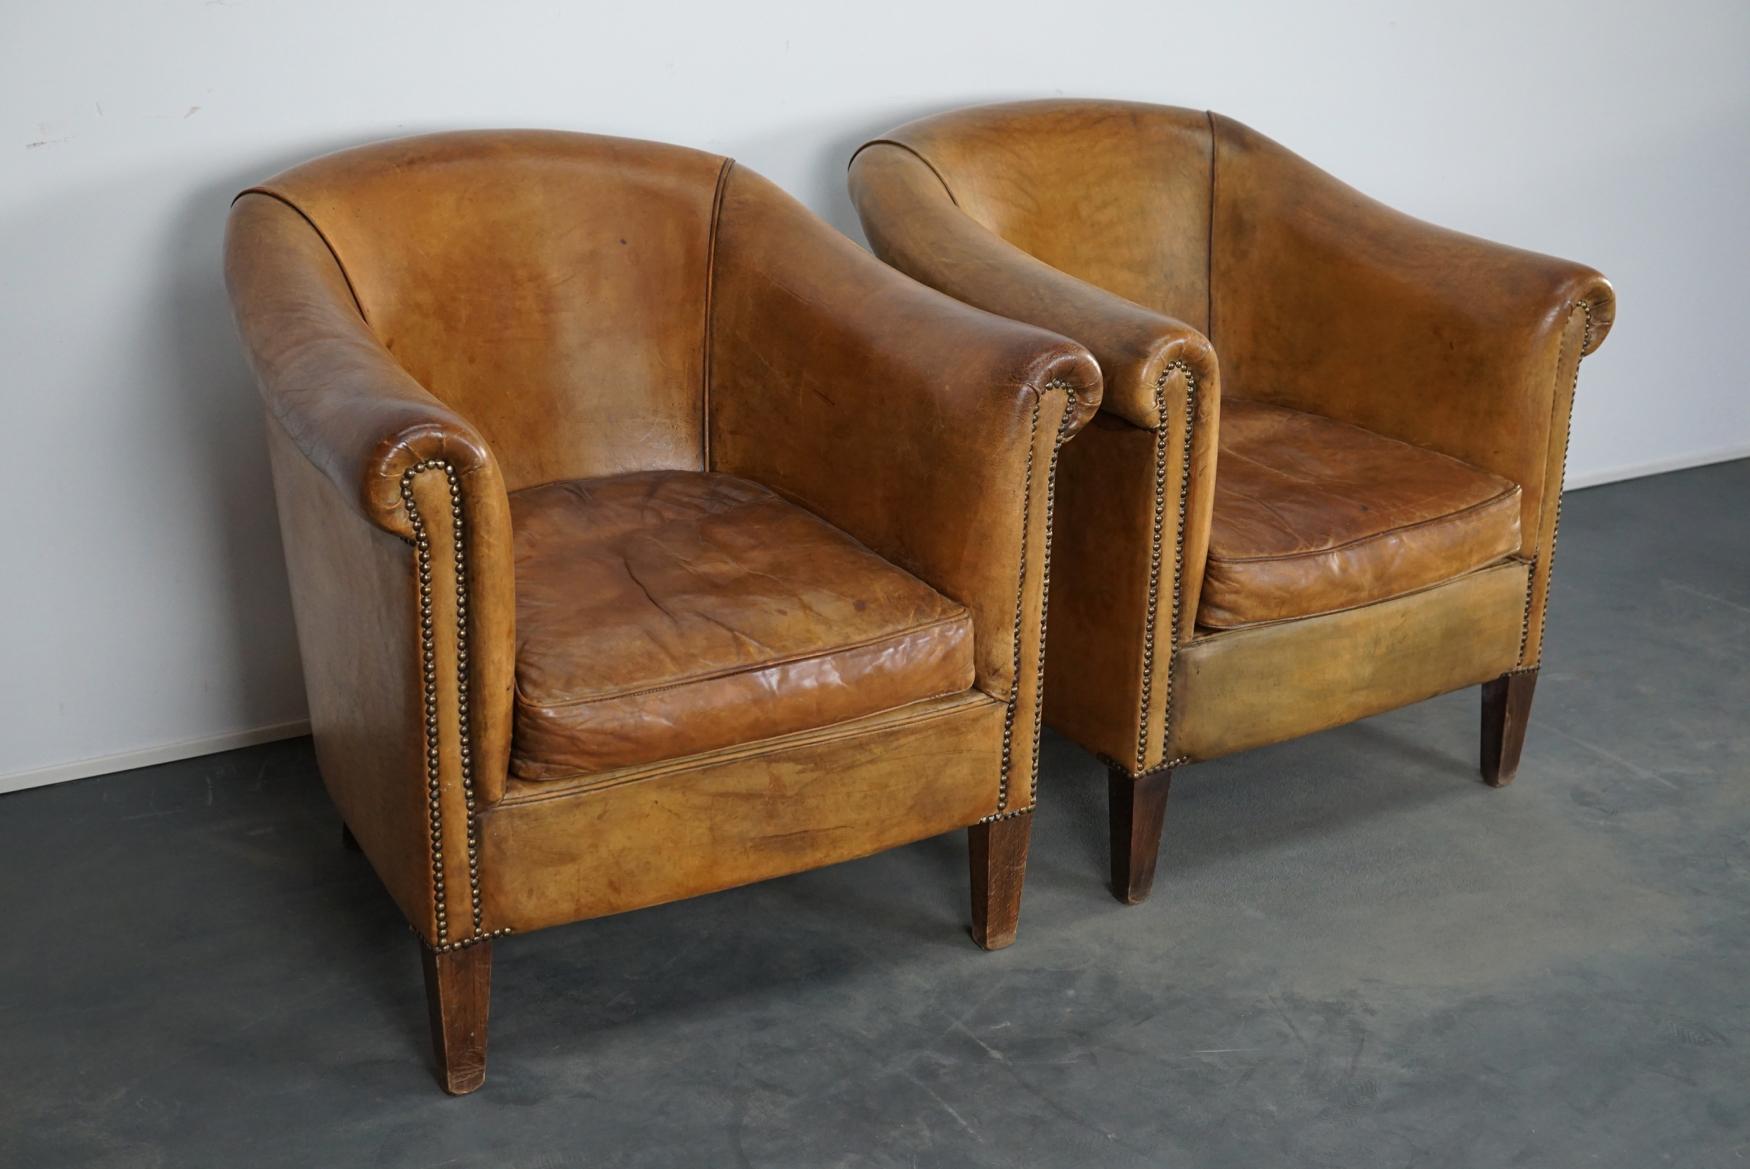 This pair of cognac-colored leather club chairs come from the Netherlands. They are upholstered with cognac-colored leather and feature metal rivets and wooden legs.
      